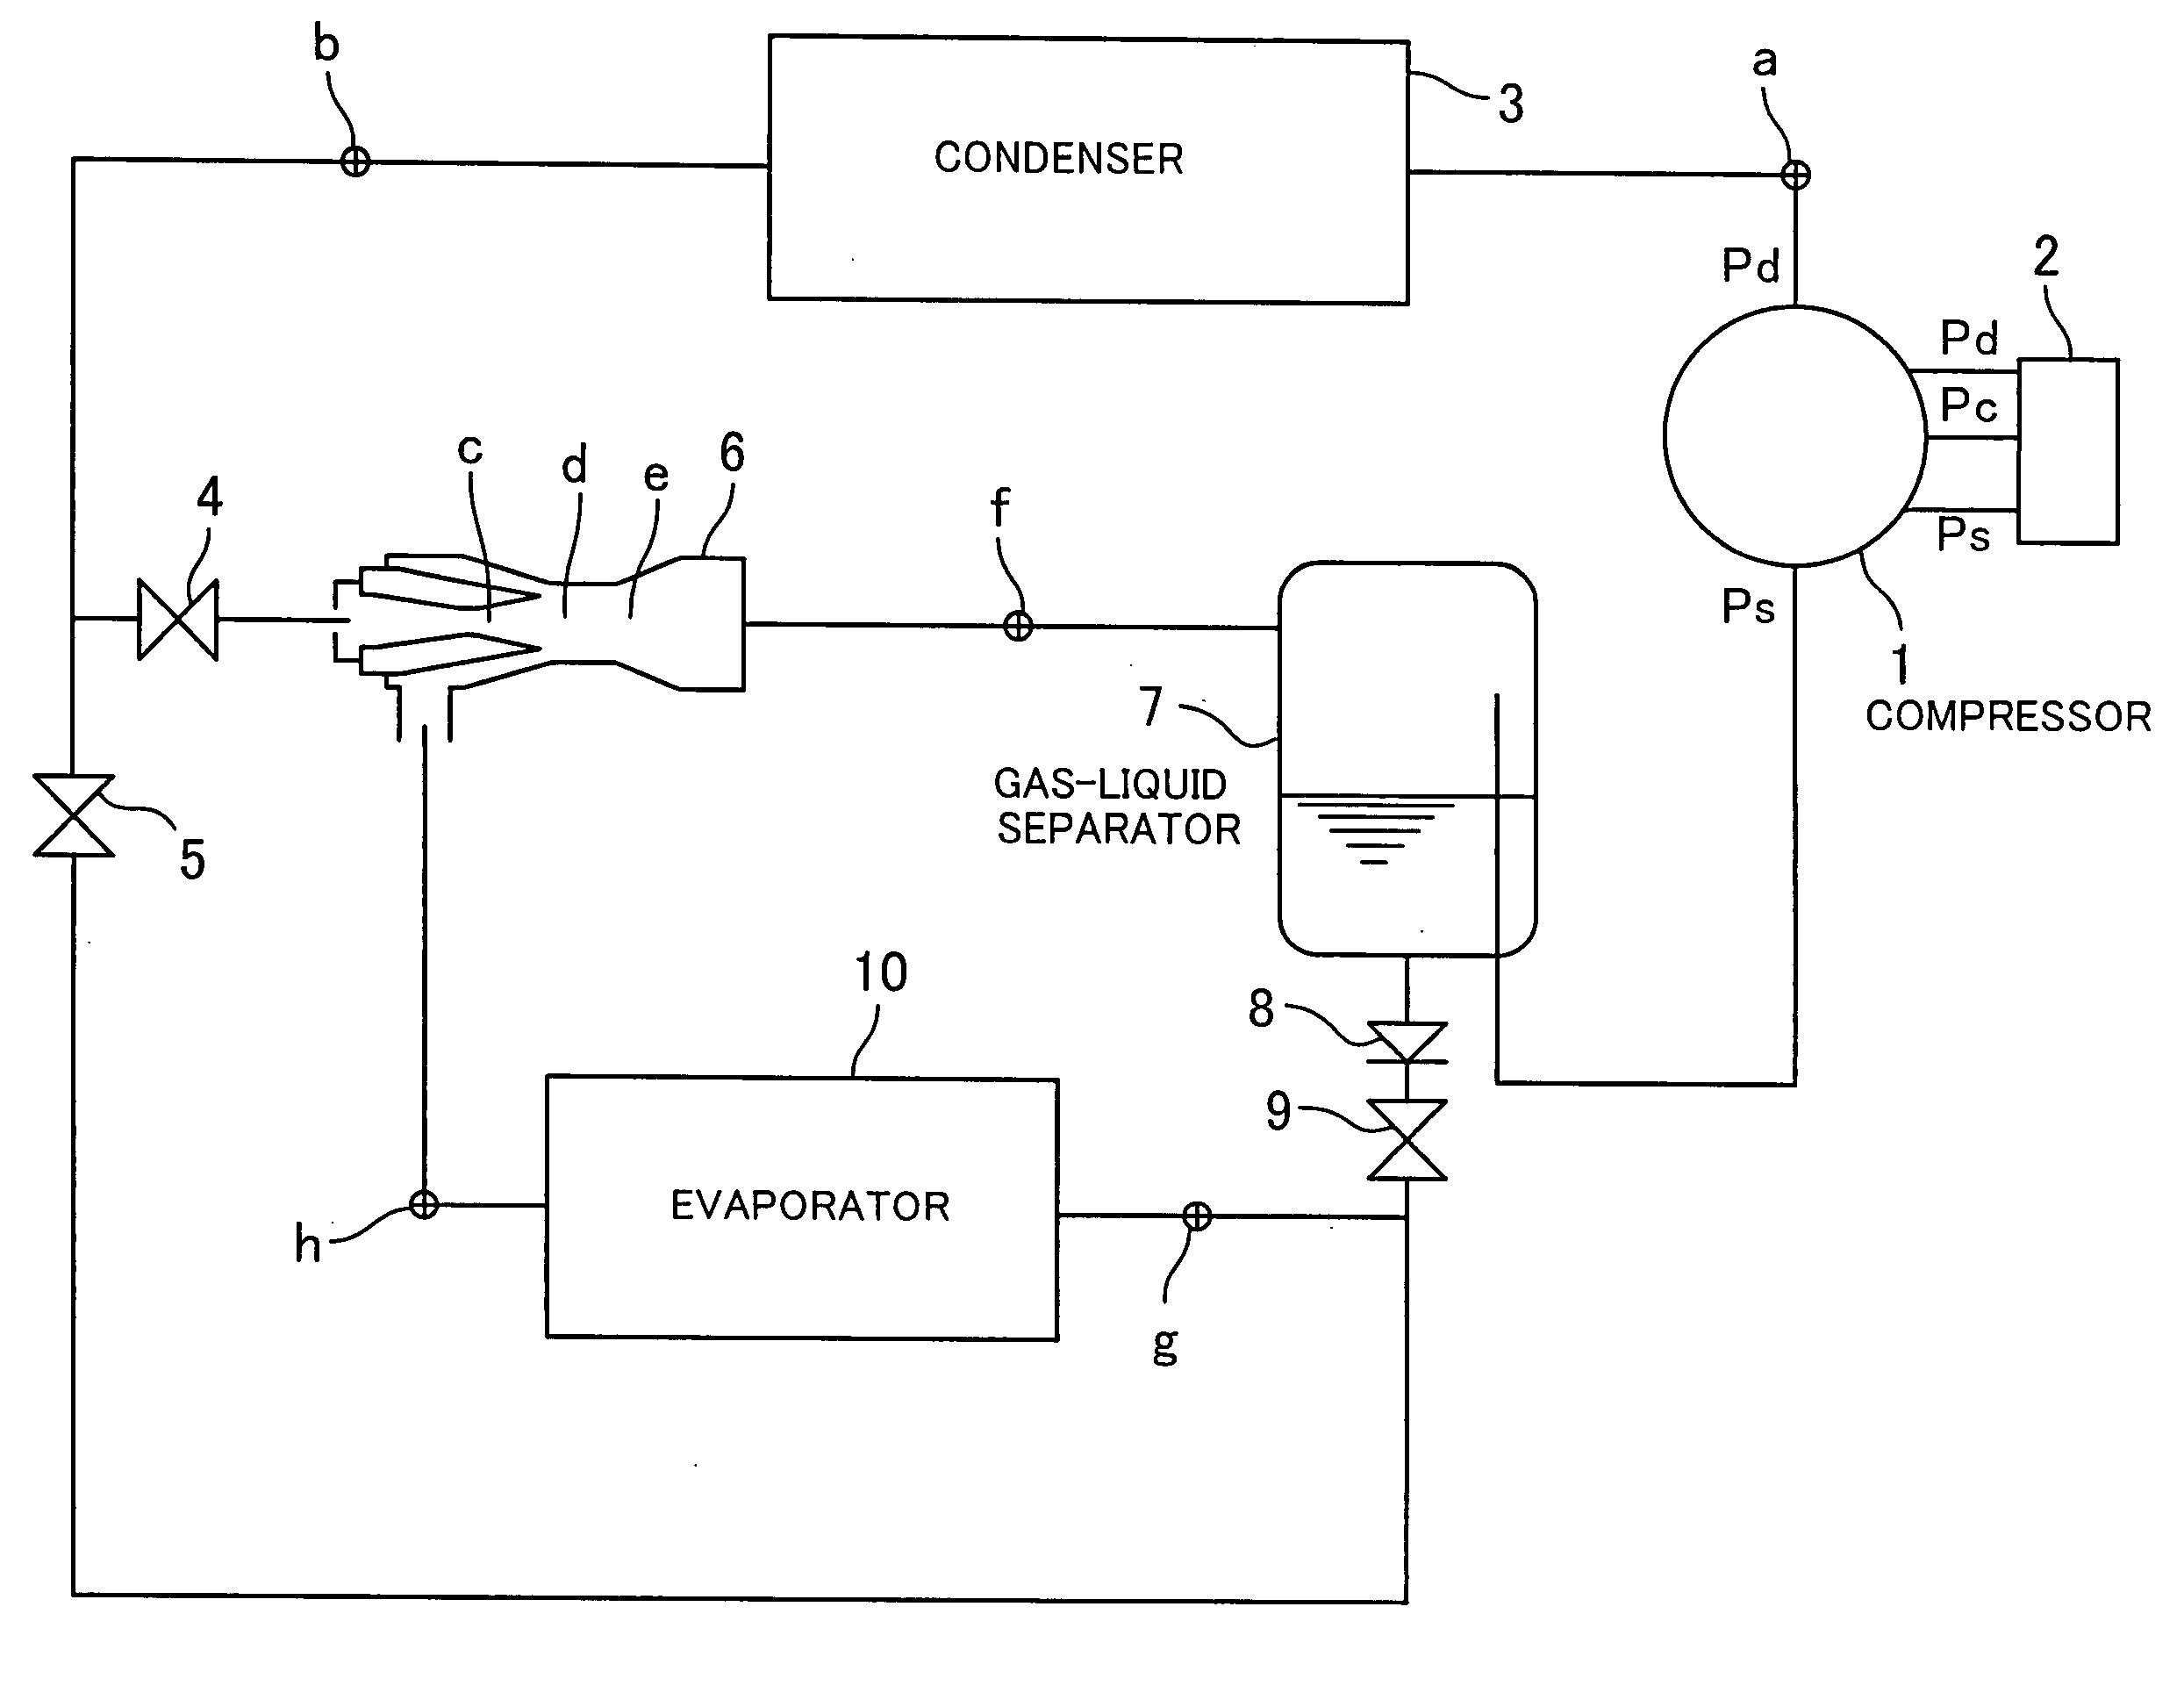 Refrigeration cycle